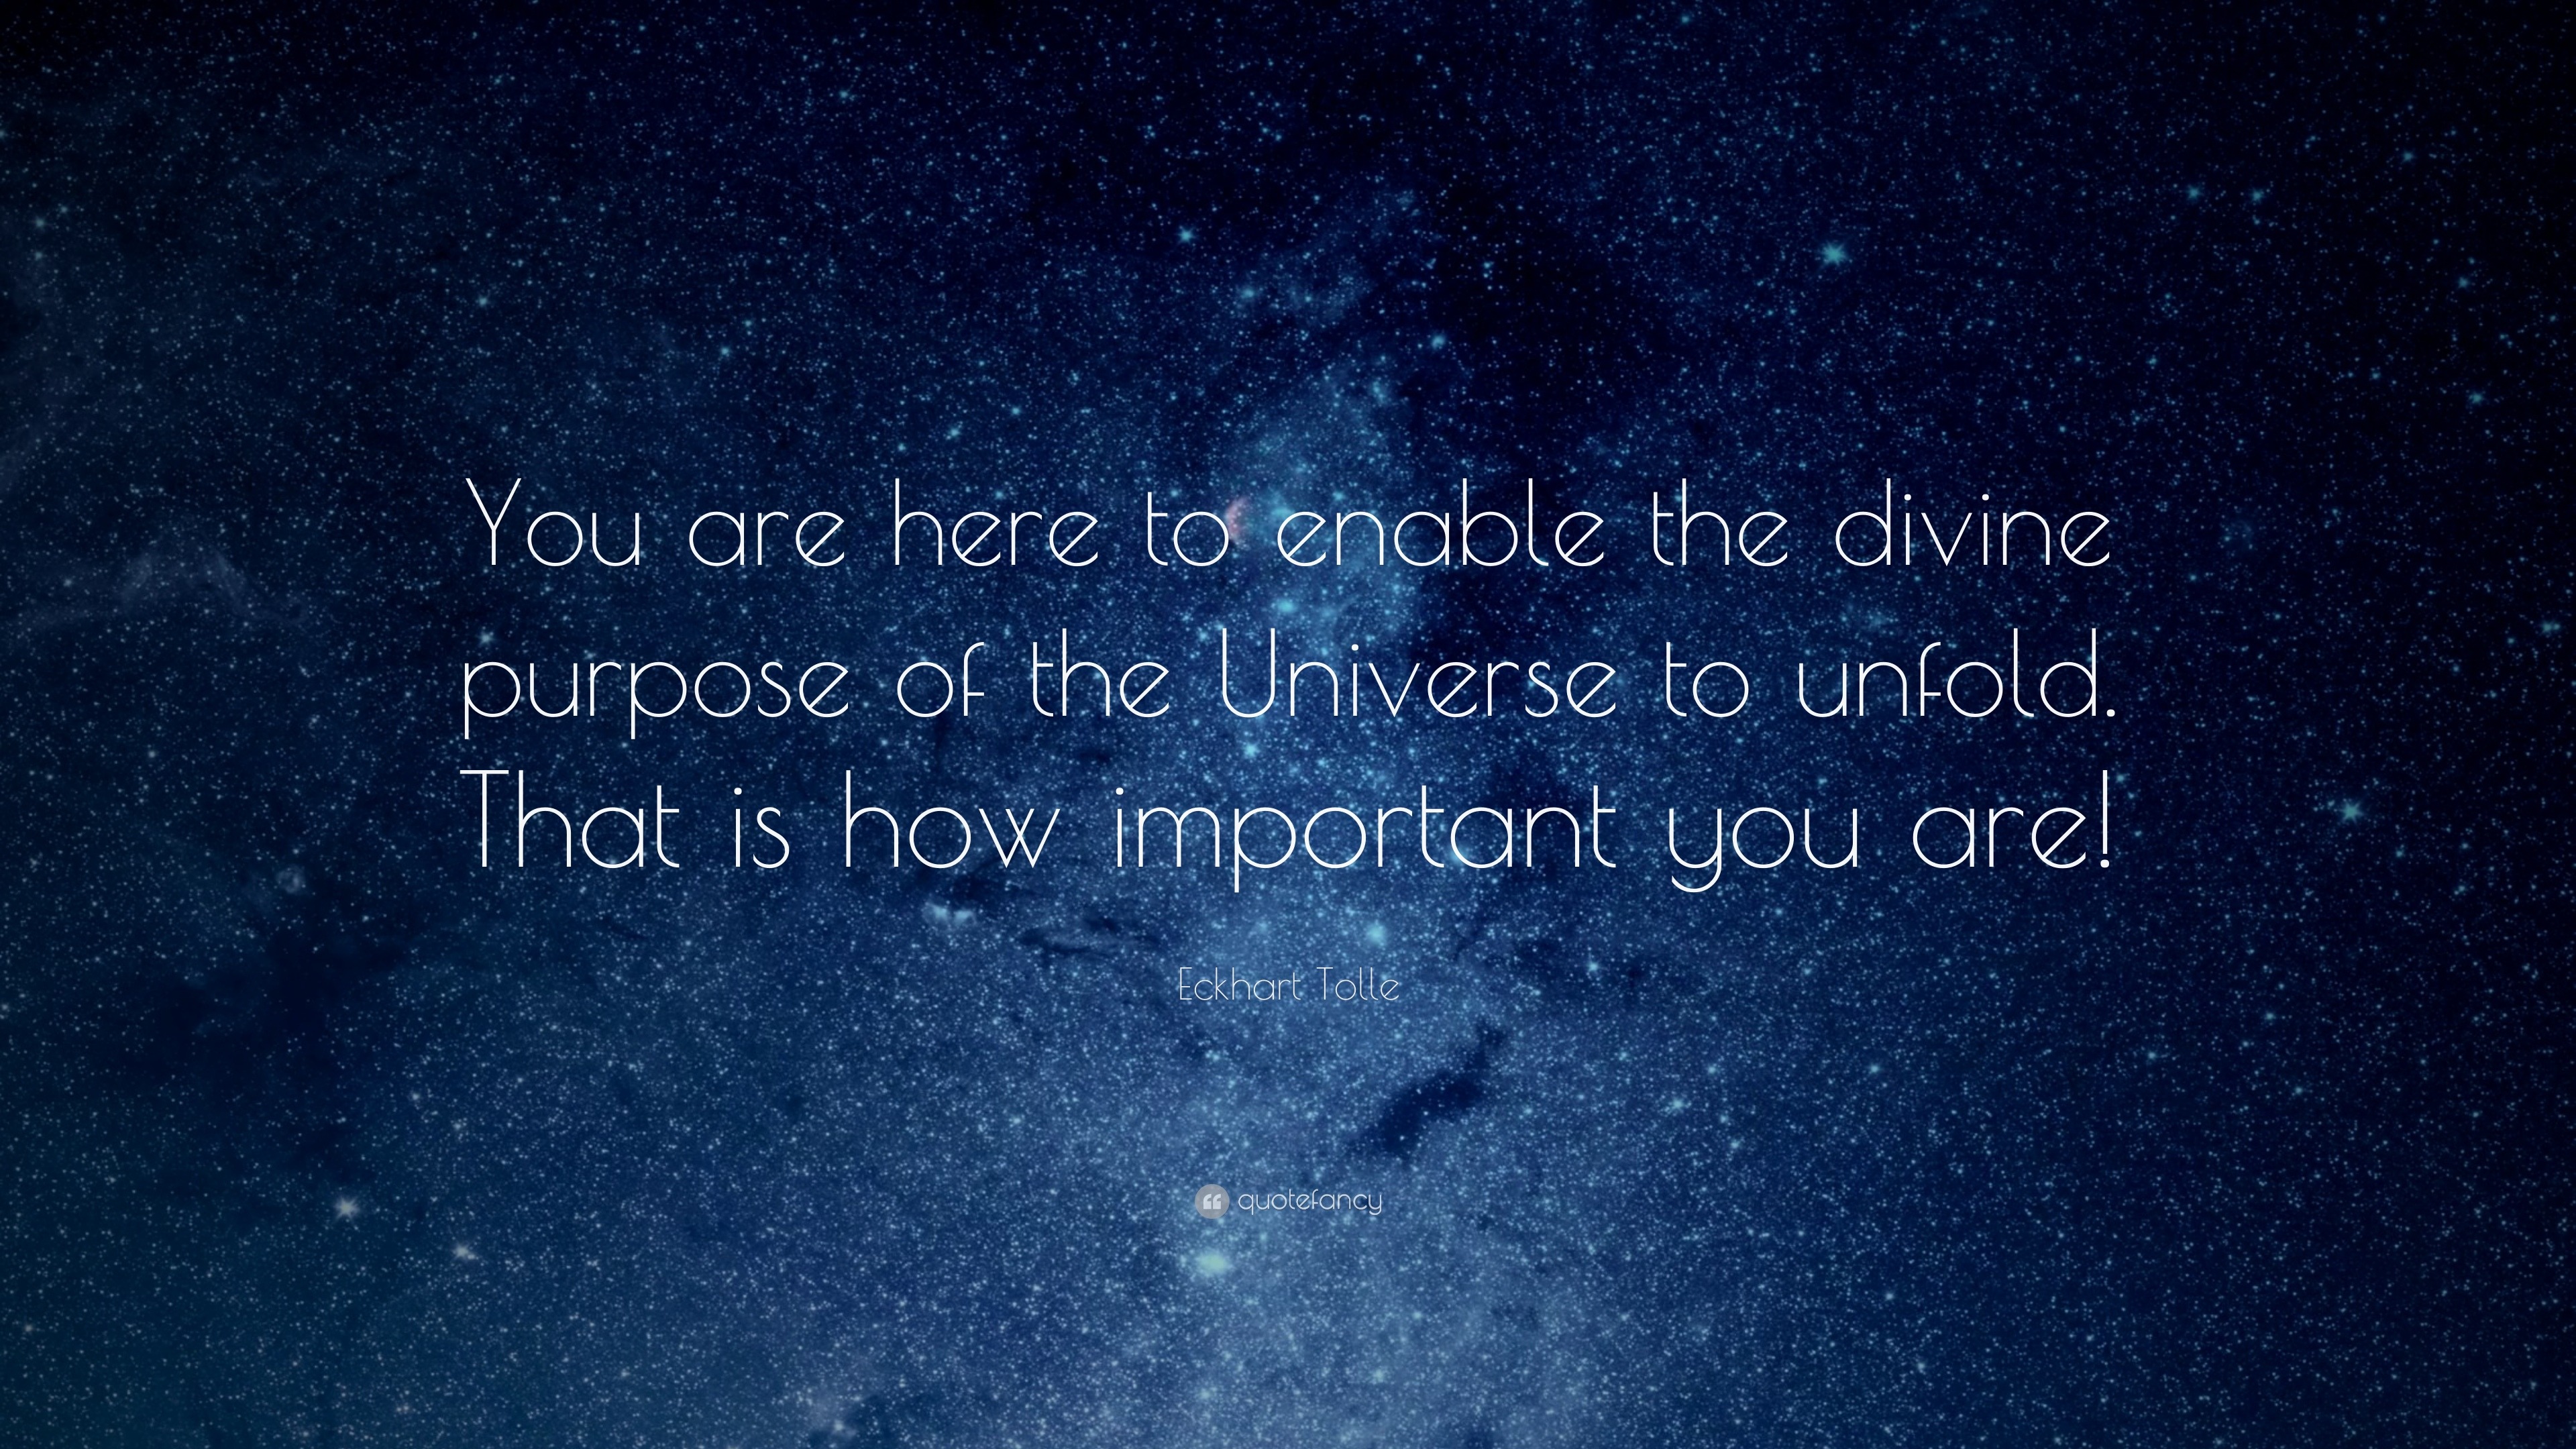 Eckhart Tolle Quote: “You are here to enable the divine purpose of the